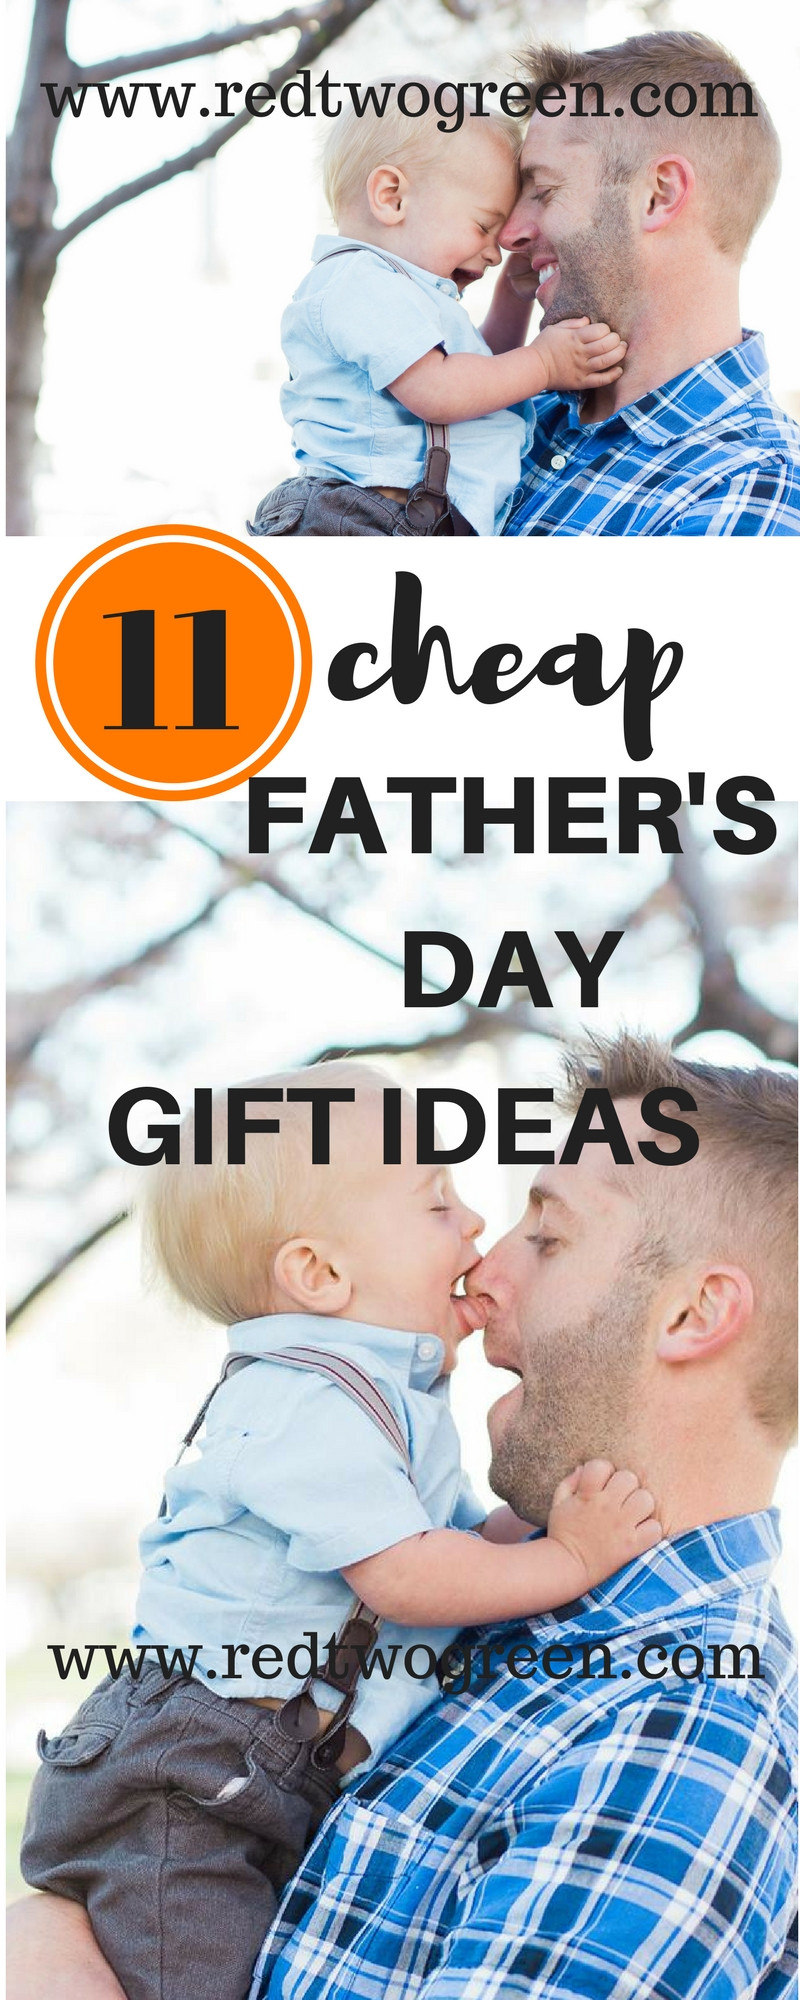 Inexpensive Father'S Day Gift Ideas
 11 CHEAP FATHER S DAY GIFT IDEAS – R E D T W O G R E E N